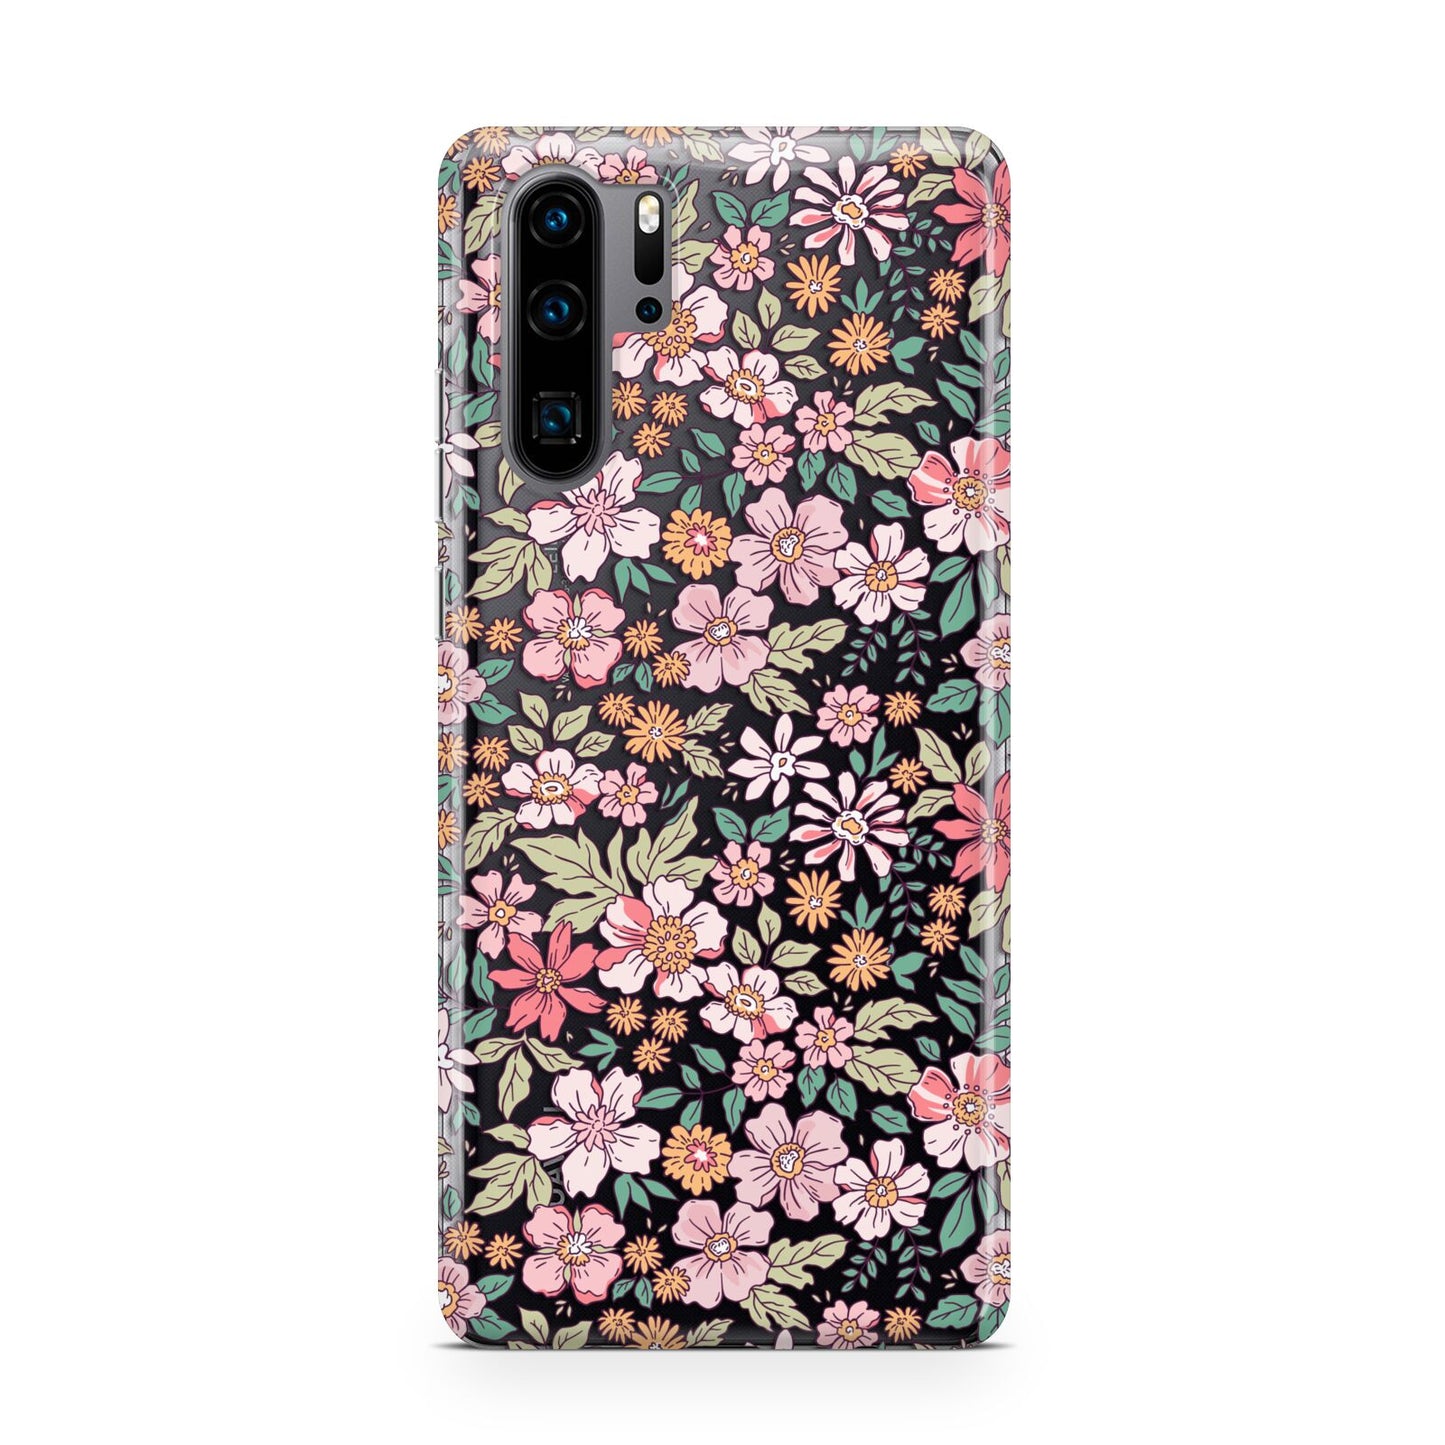 Small Floral Pattern Huawei P30 Pro Phone Case